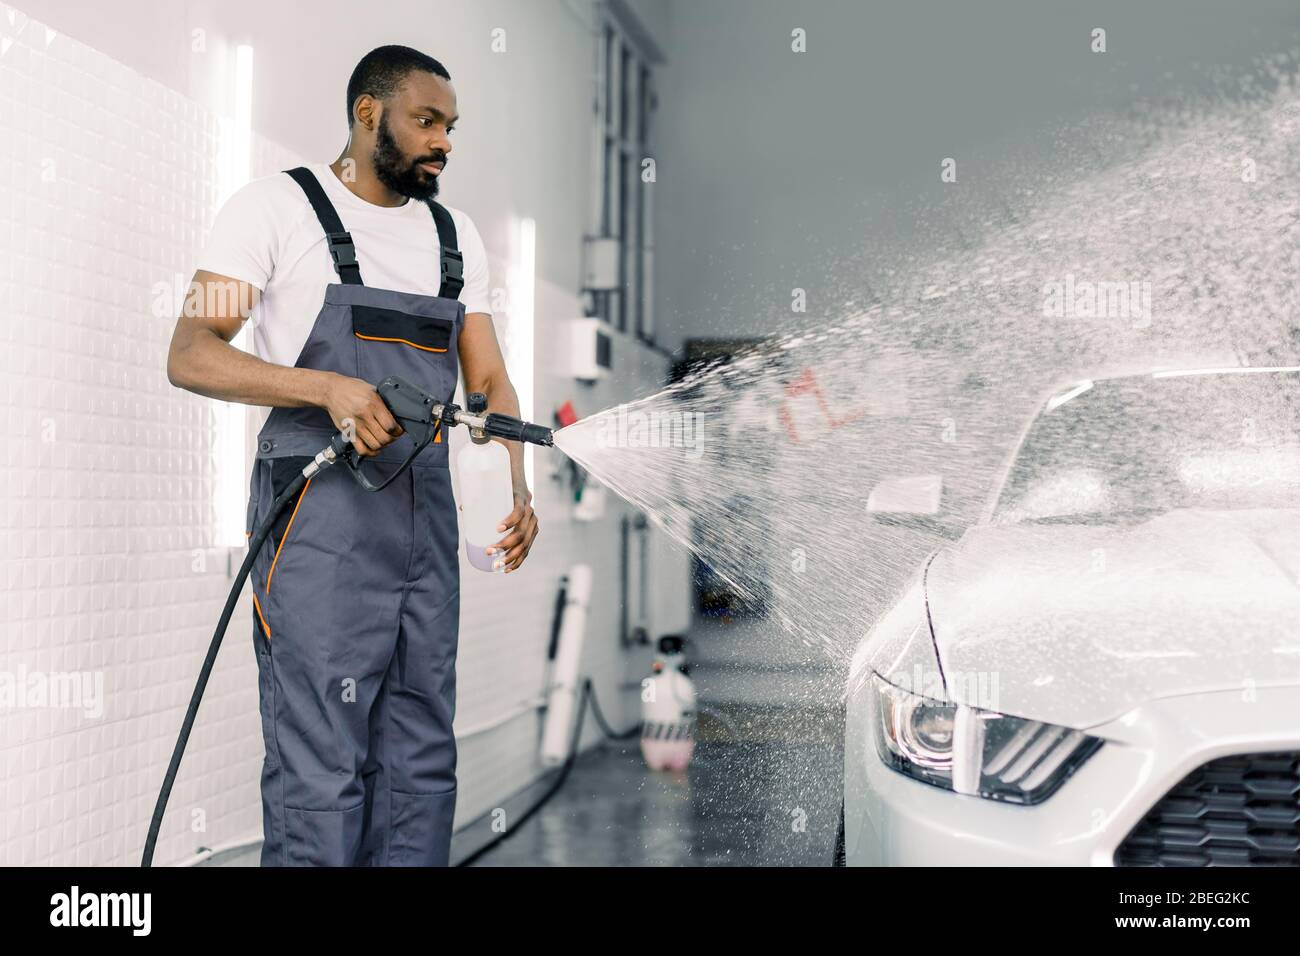 African American man, car wash worker is spraying cleaning foam to